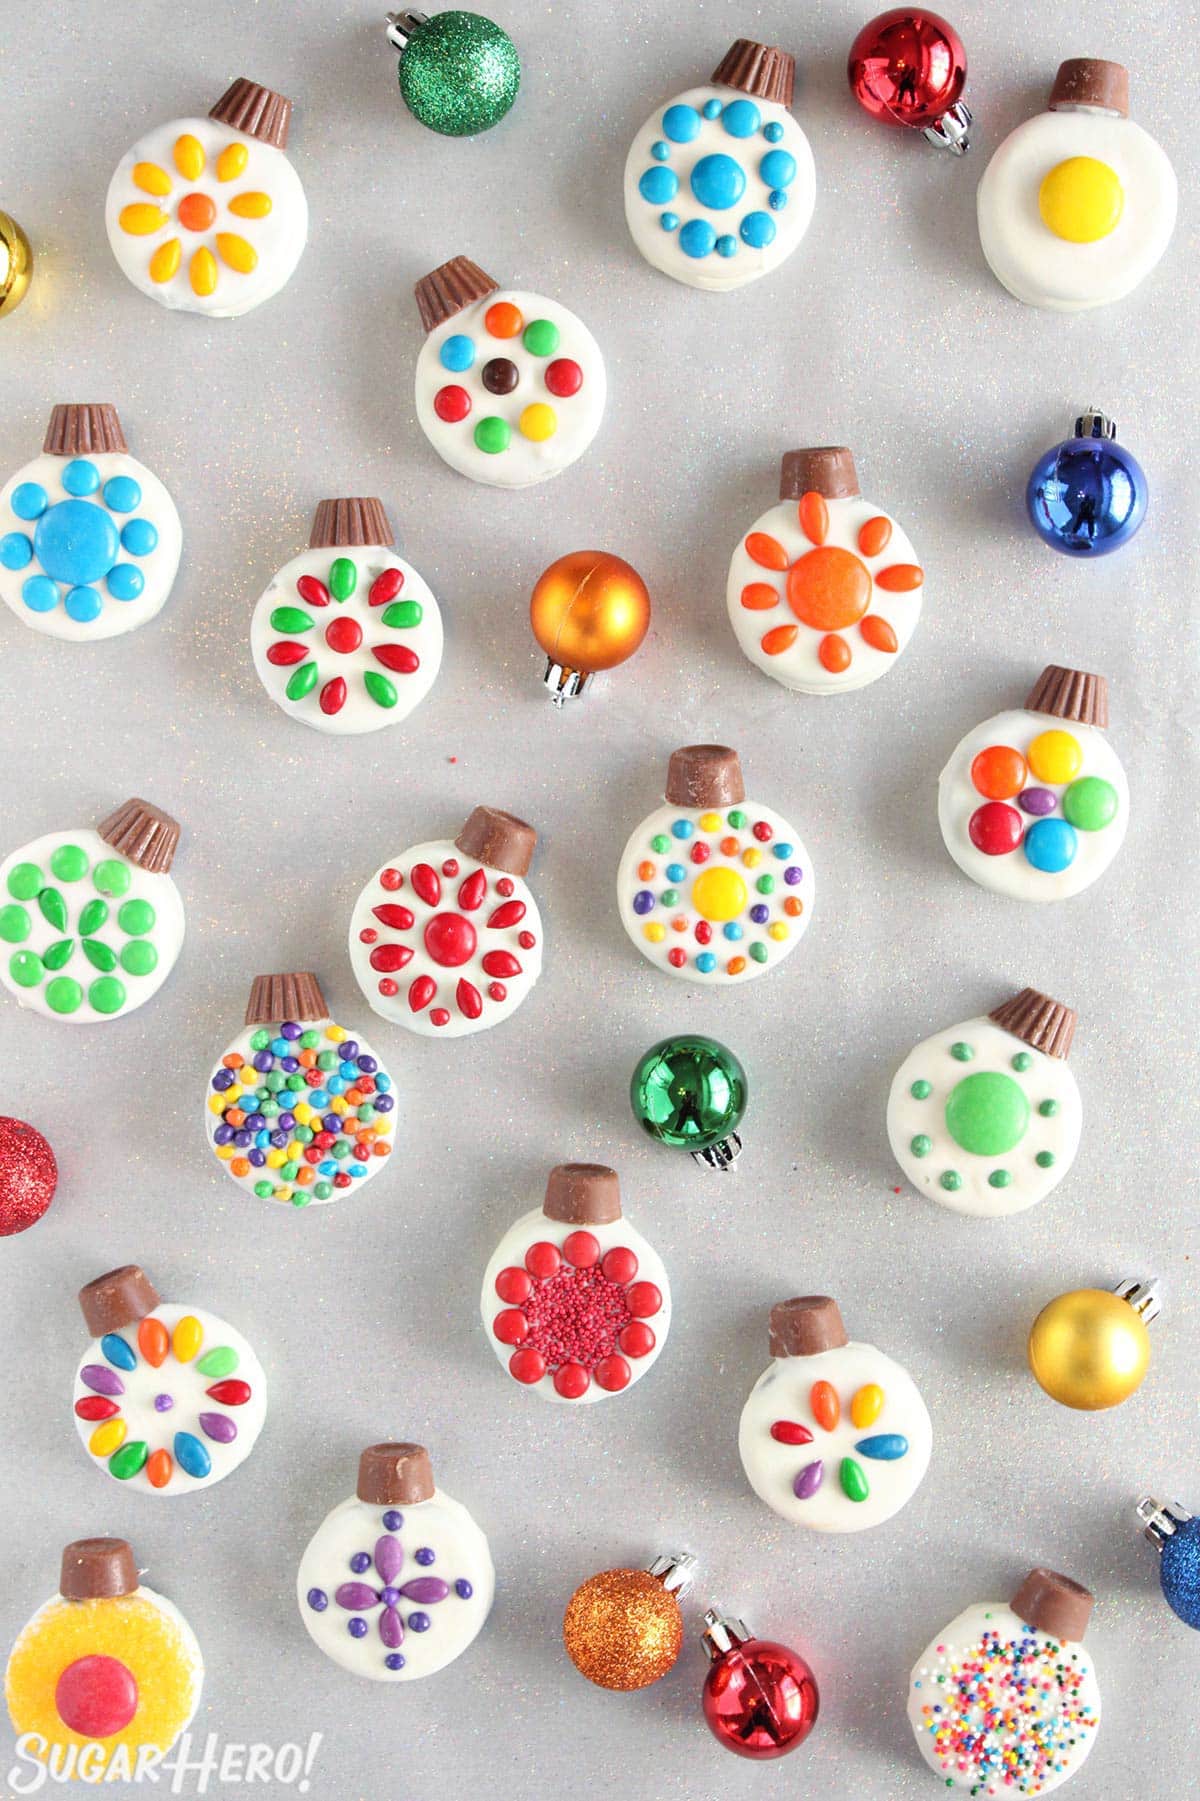 Oreo Cookie Christmas Ornaments - bright and colorful Christmas cookies arranged with ornaments around | From SugarHero.com